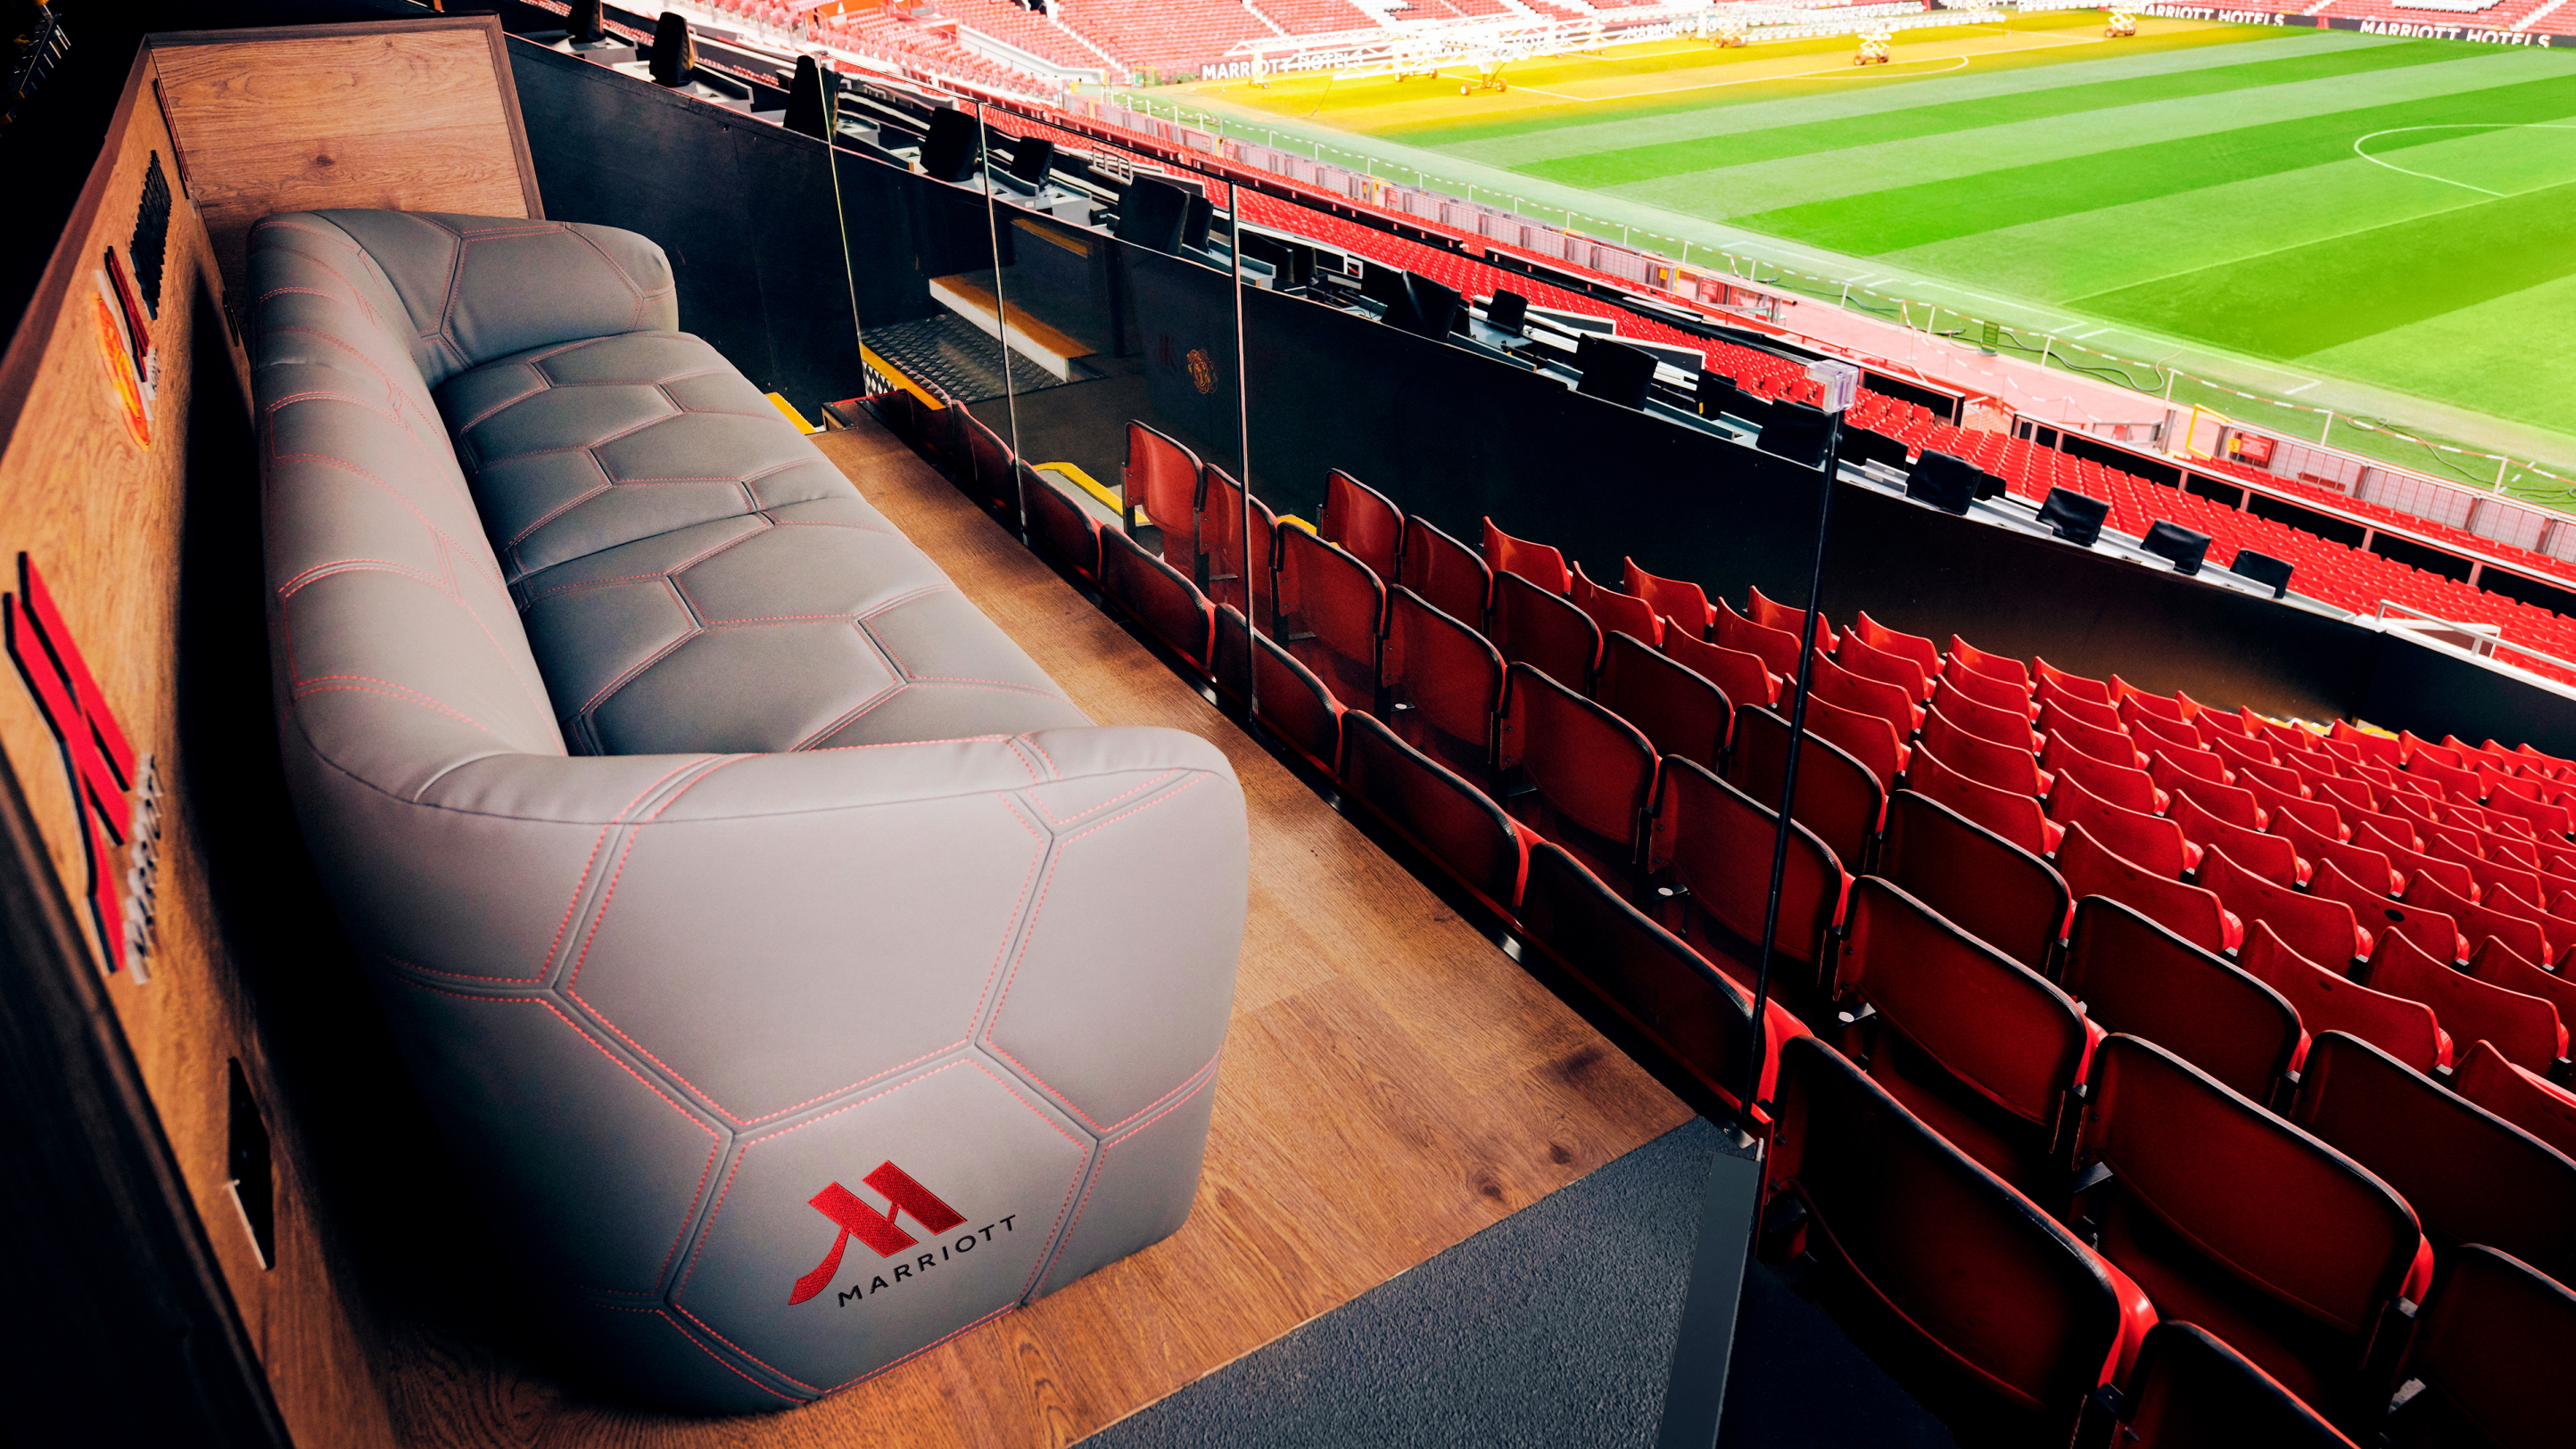 Debuting this Sunday at the Manchester United vs Liverpool game, with support from Wes Brown and Park Ji-Sung, the Seat of Dreams will give fans at every game the chance to experience match day from a unique and coveted vantage point in the stadium while enjoying special perks including complimentary food and drinks, early entry to the stadium, and the opportunity to meet Manchester United Legends. Click to enlarge.